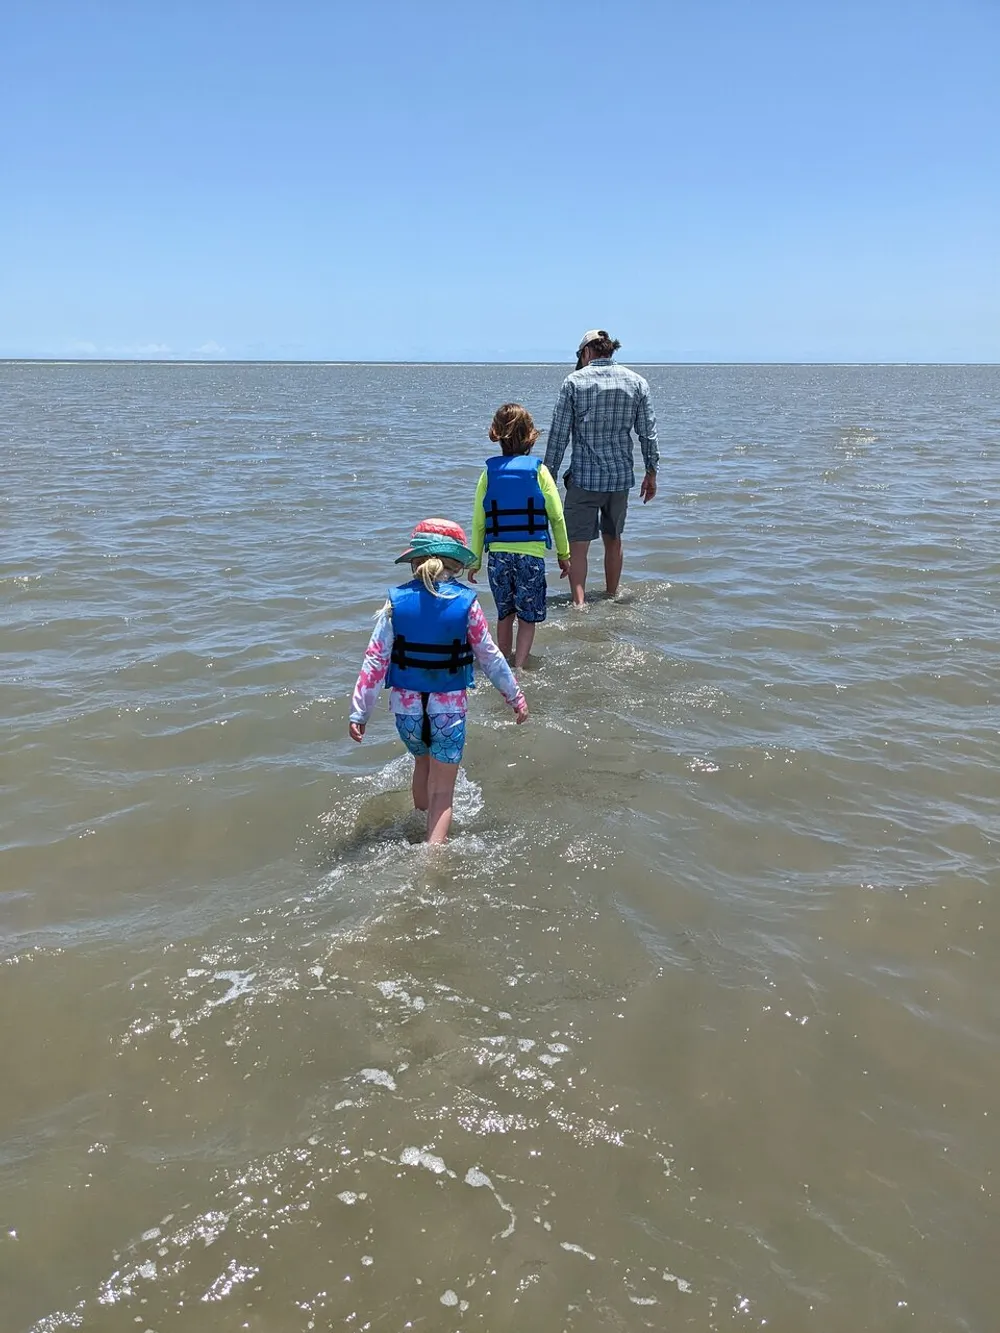 Three individuals possibly a family are walking through shallow waters facing away from the camera on a sunny day